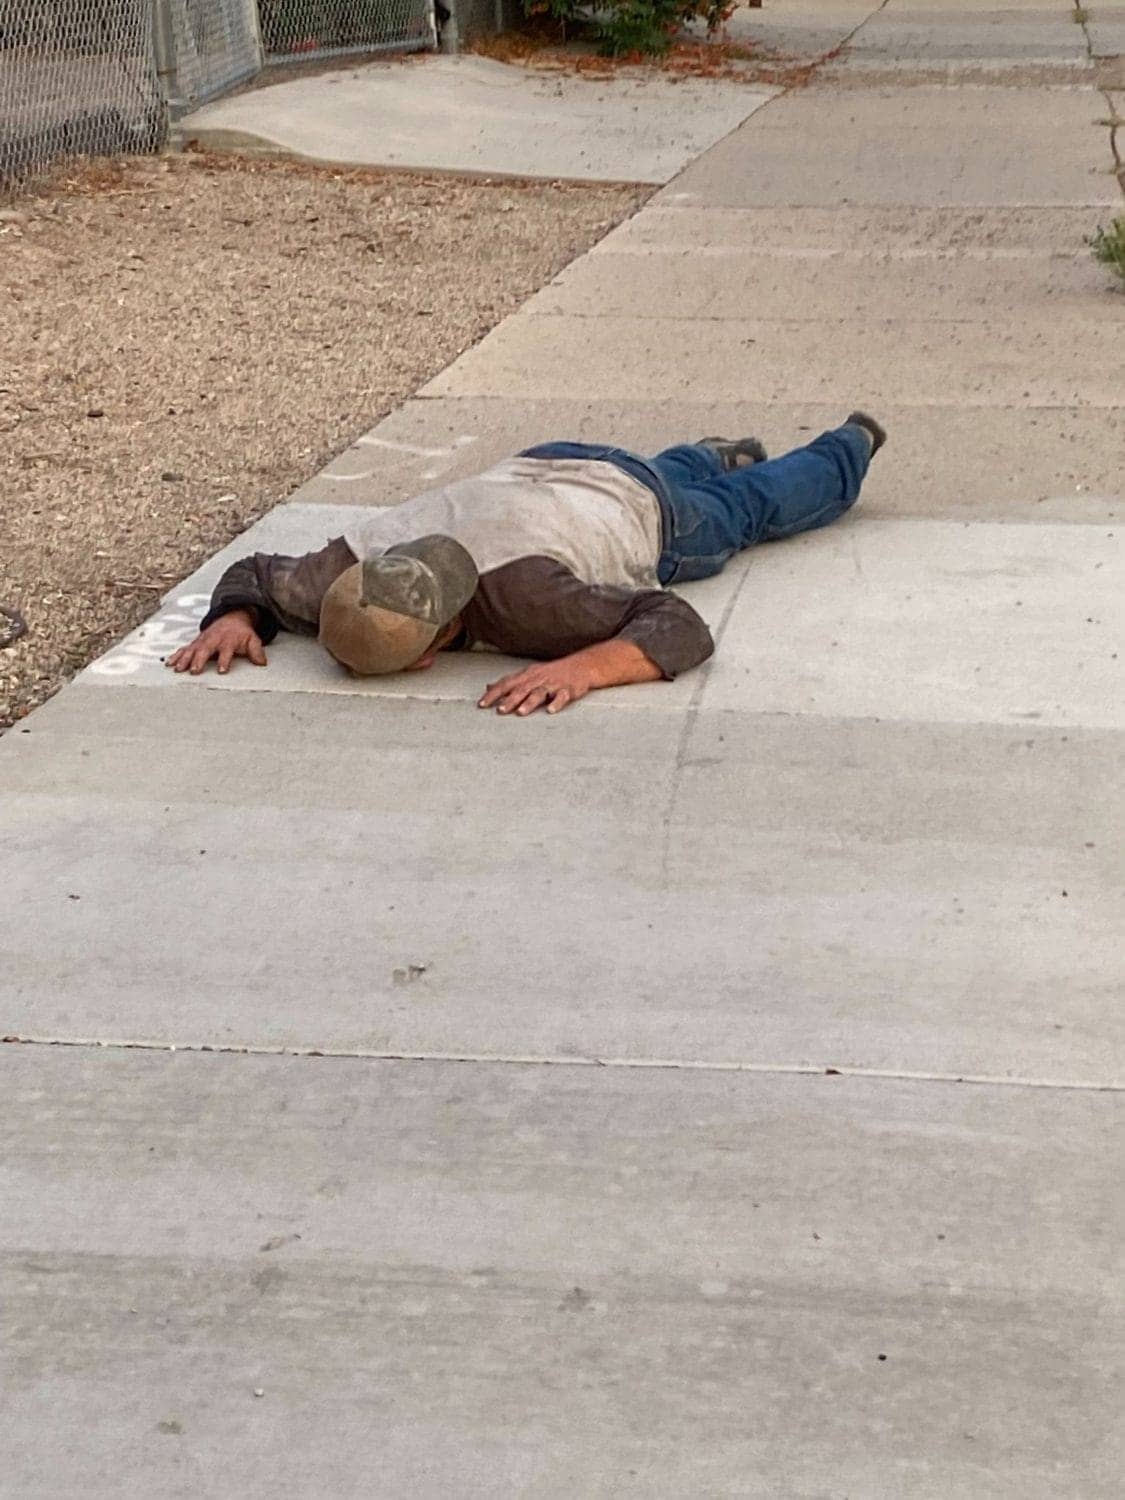 Roger-unhoused-person-in-Salt-Lake-City-by-Tiny-072921, From Salt Lake to San Francisco, from Ute to Huichin: Sweeping, killing and resisting, News & Views 